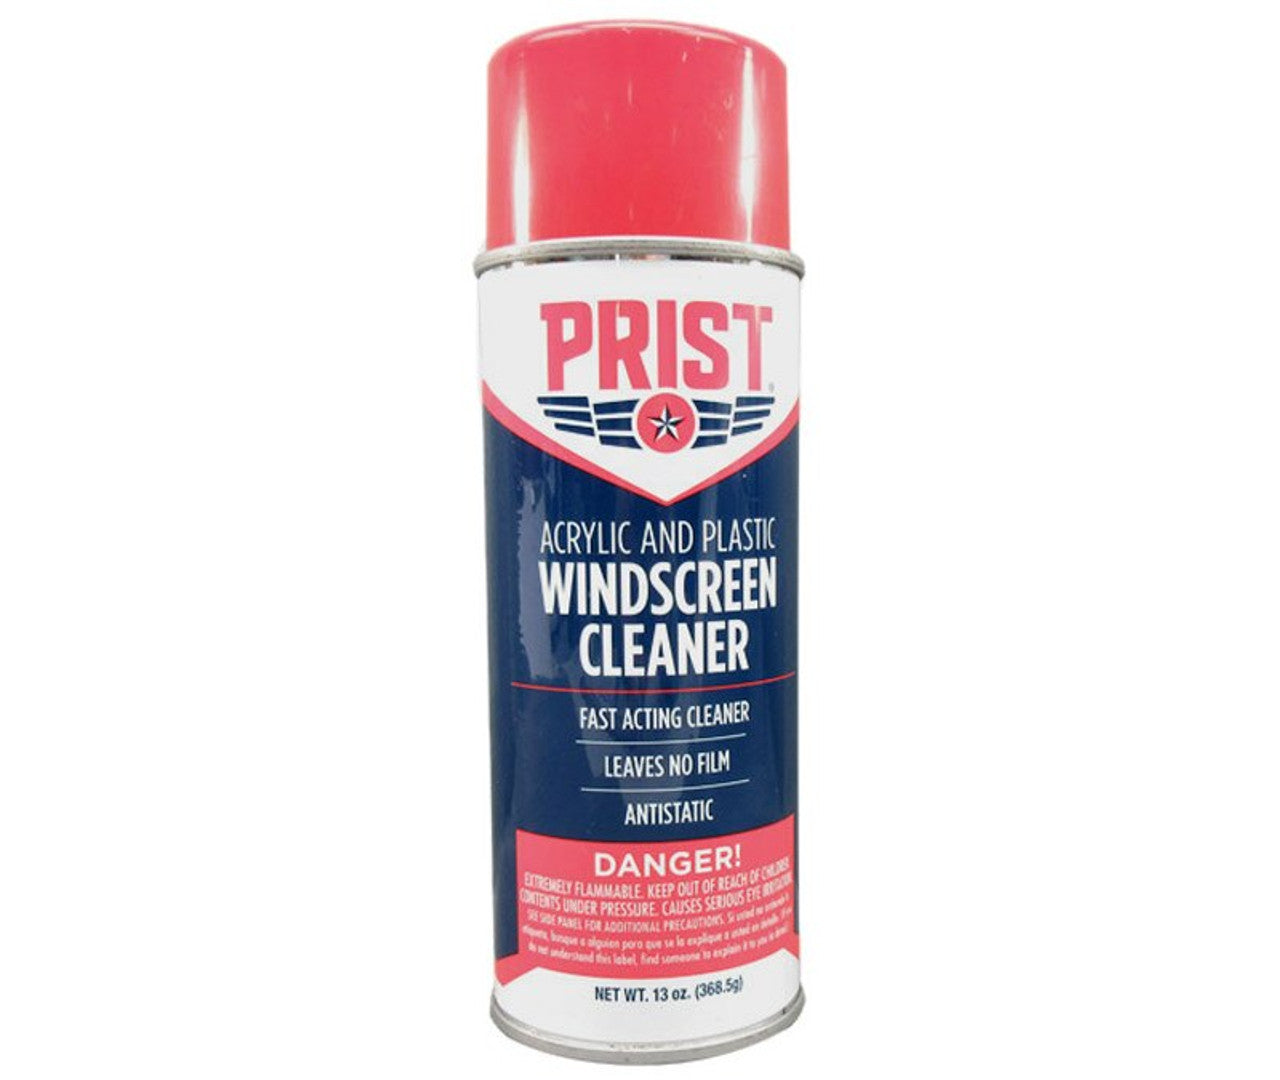 PRIST® Acrylic and Plastic Windshield Cleaner